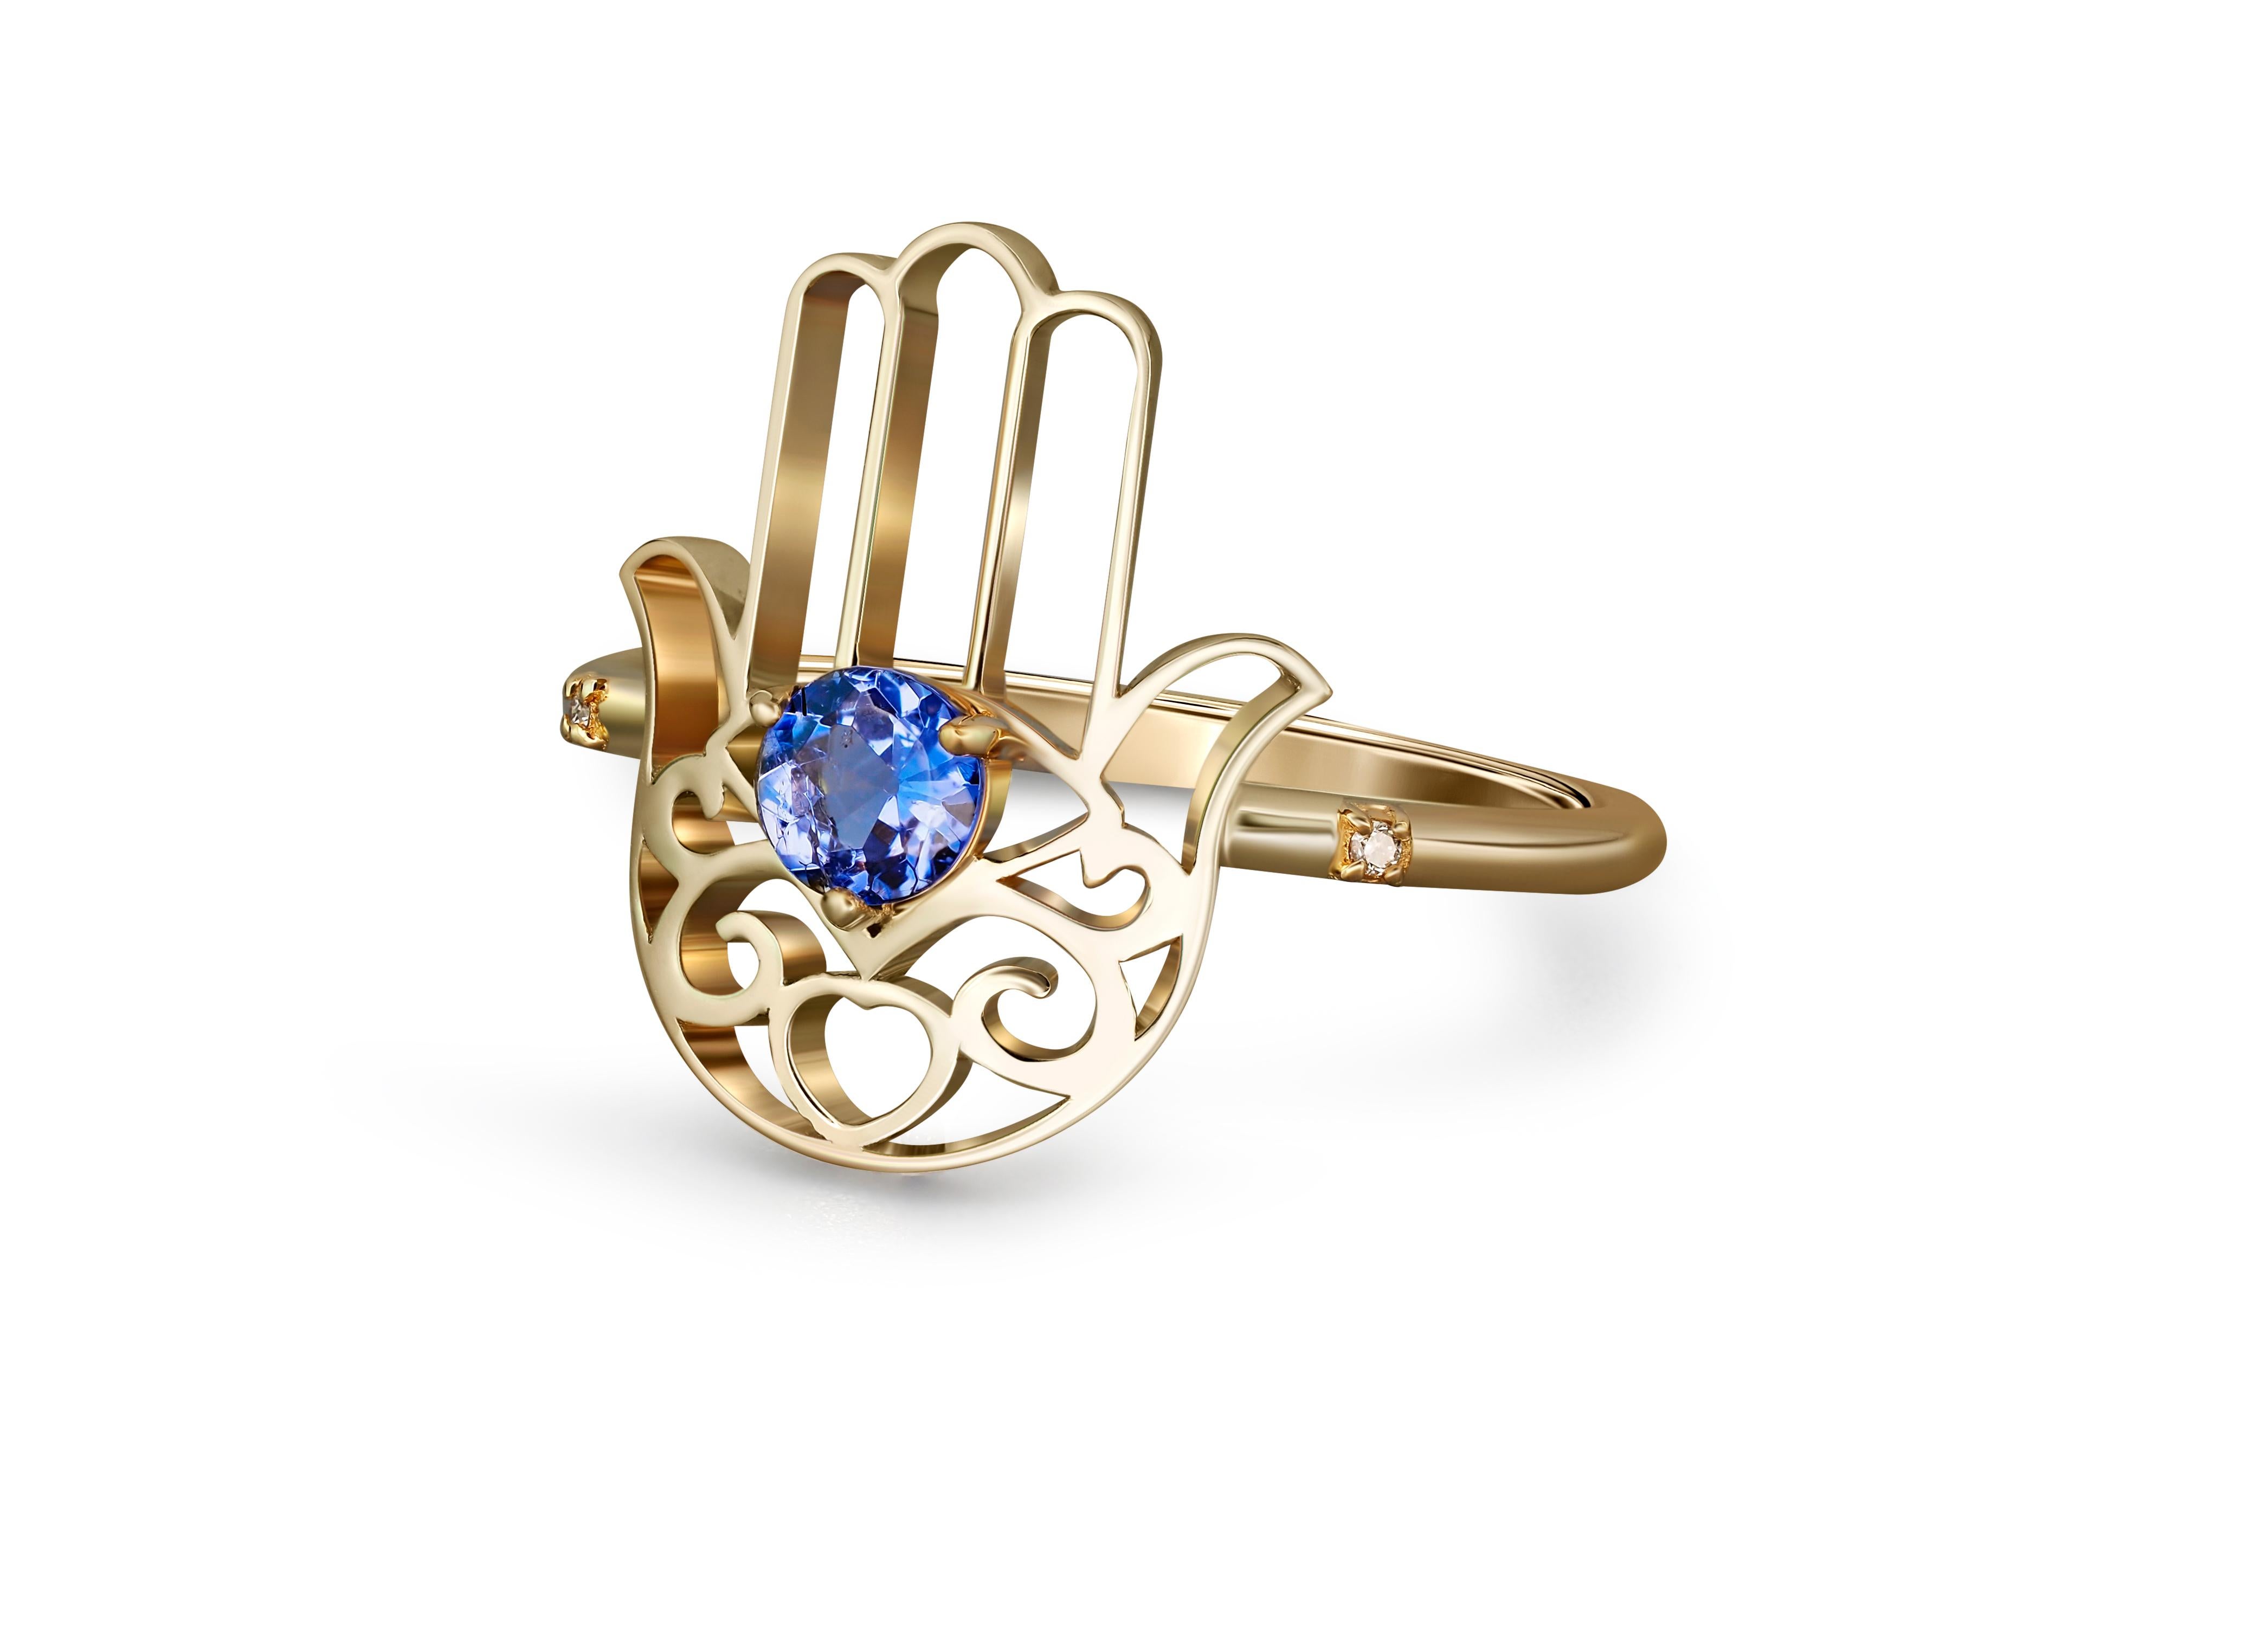 Hamsa Hand Tanzanite ring in 14k gold. 
Hand of Fatima gold Ring. Gold Protection Ring. December Birthstone ring. Round tanzanite gold ring.

Weight: 2 g.
Gold - 14k yellow gold.

Central stone: Tanzanite
Cut: round
Weight: 0.5 ct.
Color: